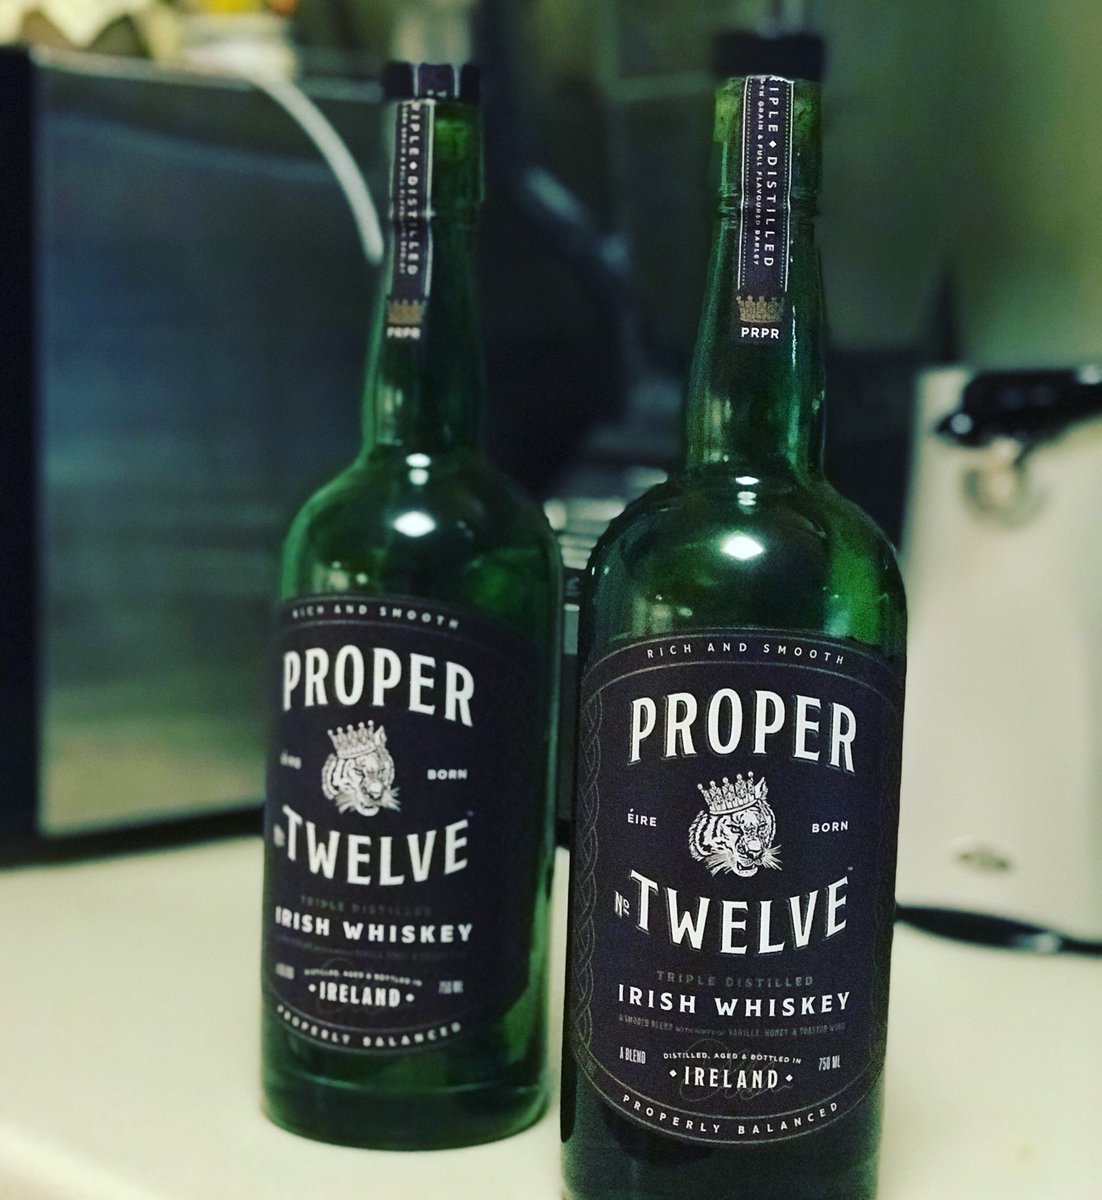 RT @Daniel36741390: Smoothest drink out there ???????? @TheNotoriousMMA https://t.co/TO4ZXshk0I